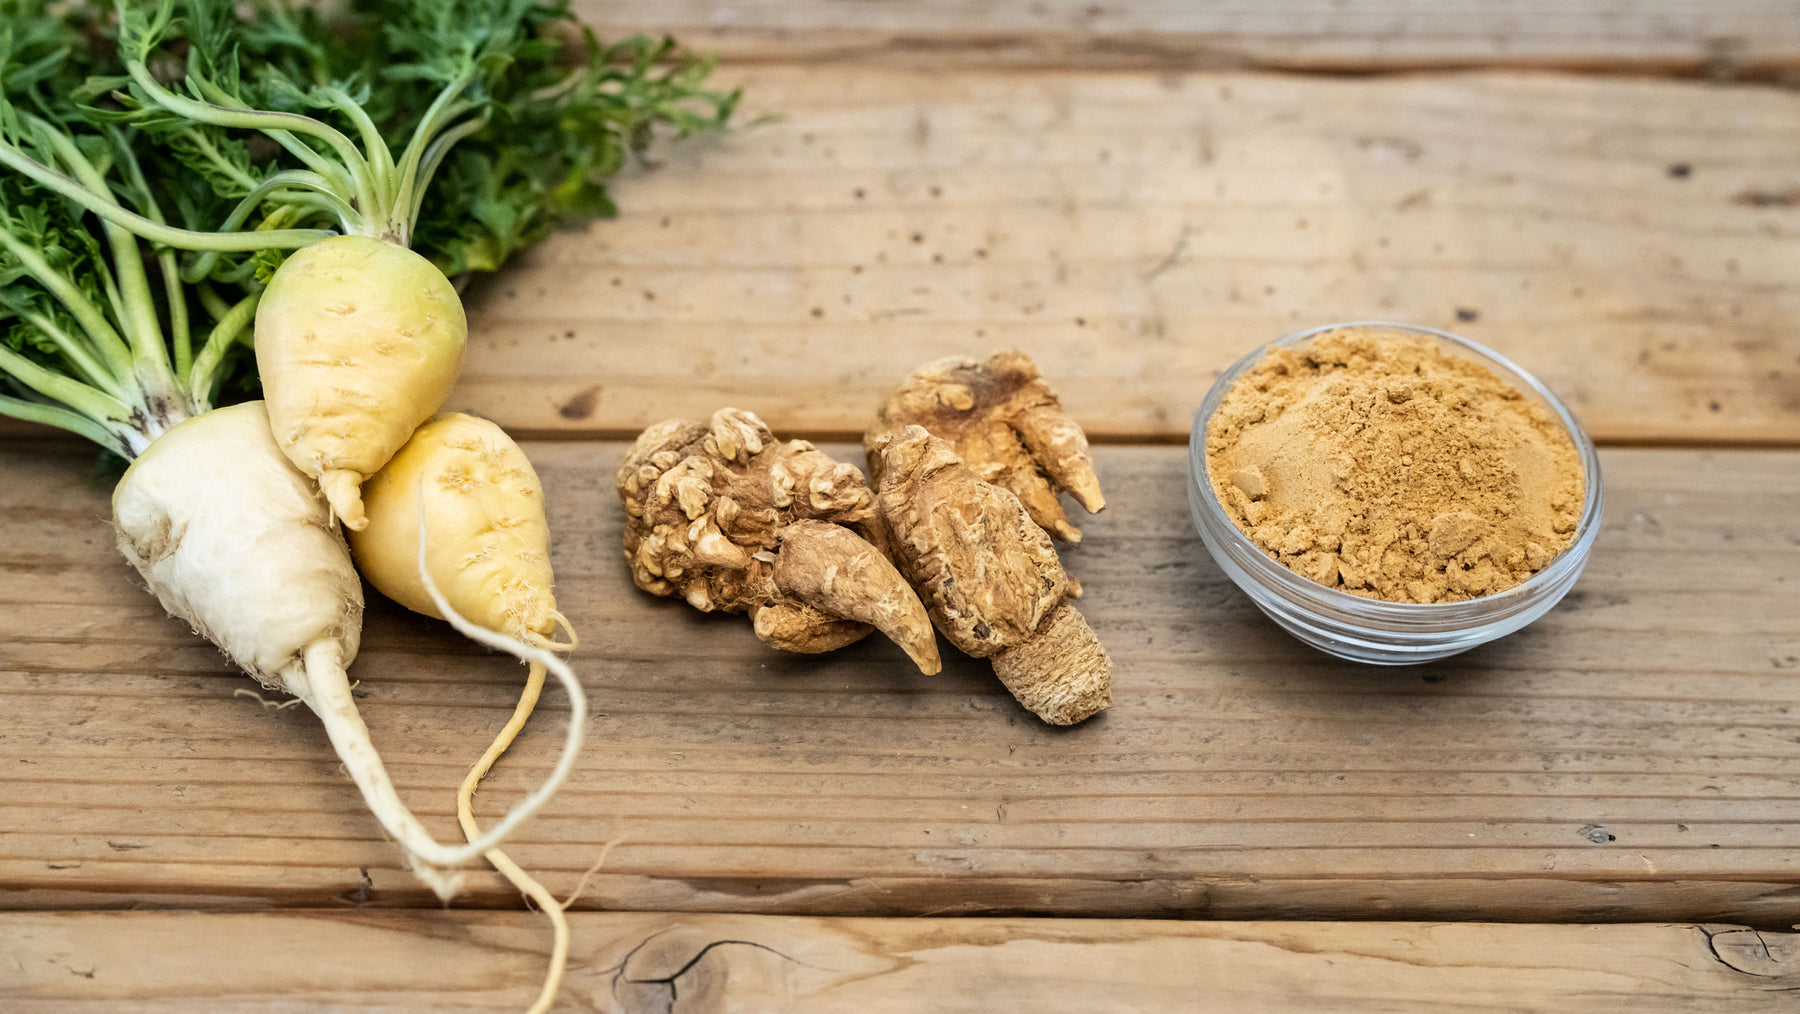 Maca For More Than Just Better Sex?